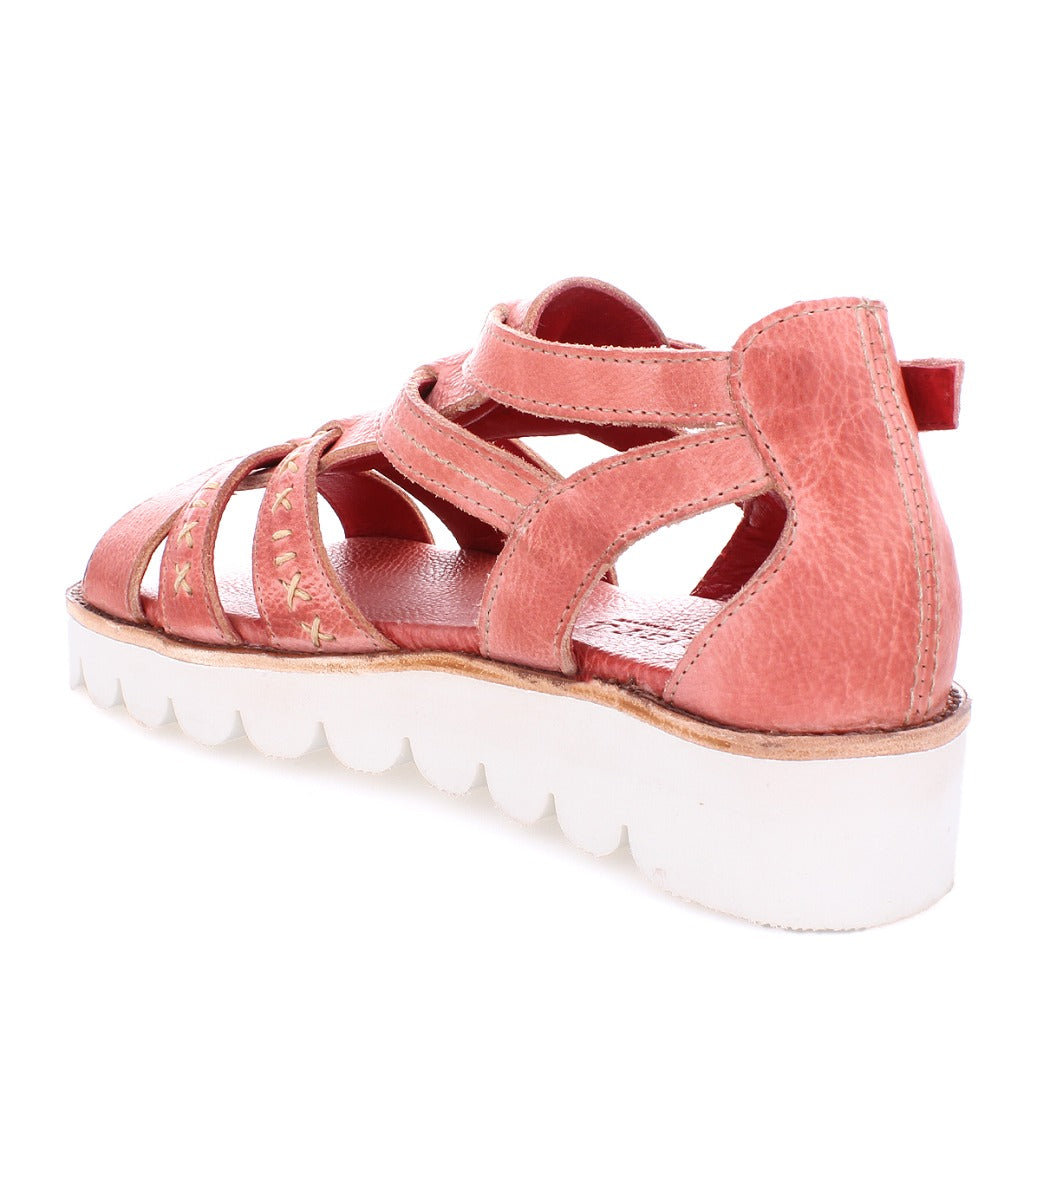 A women's pink sandal with straps and a white sole, called Wonder by Bed Stu.